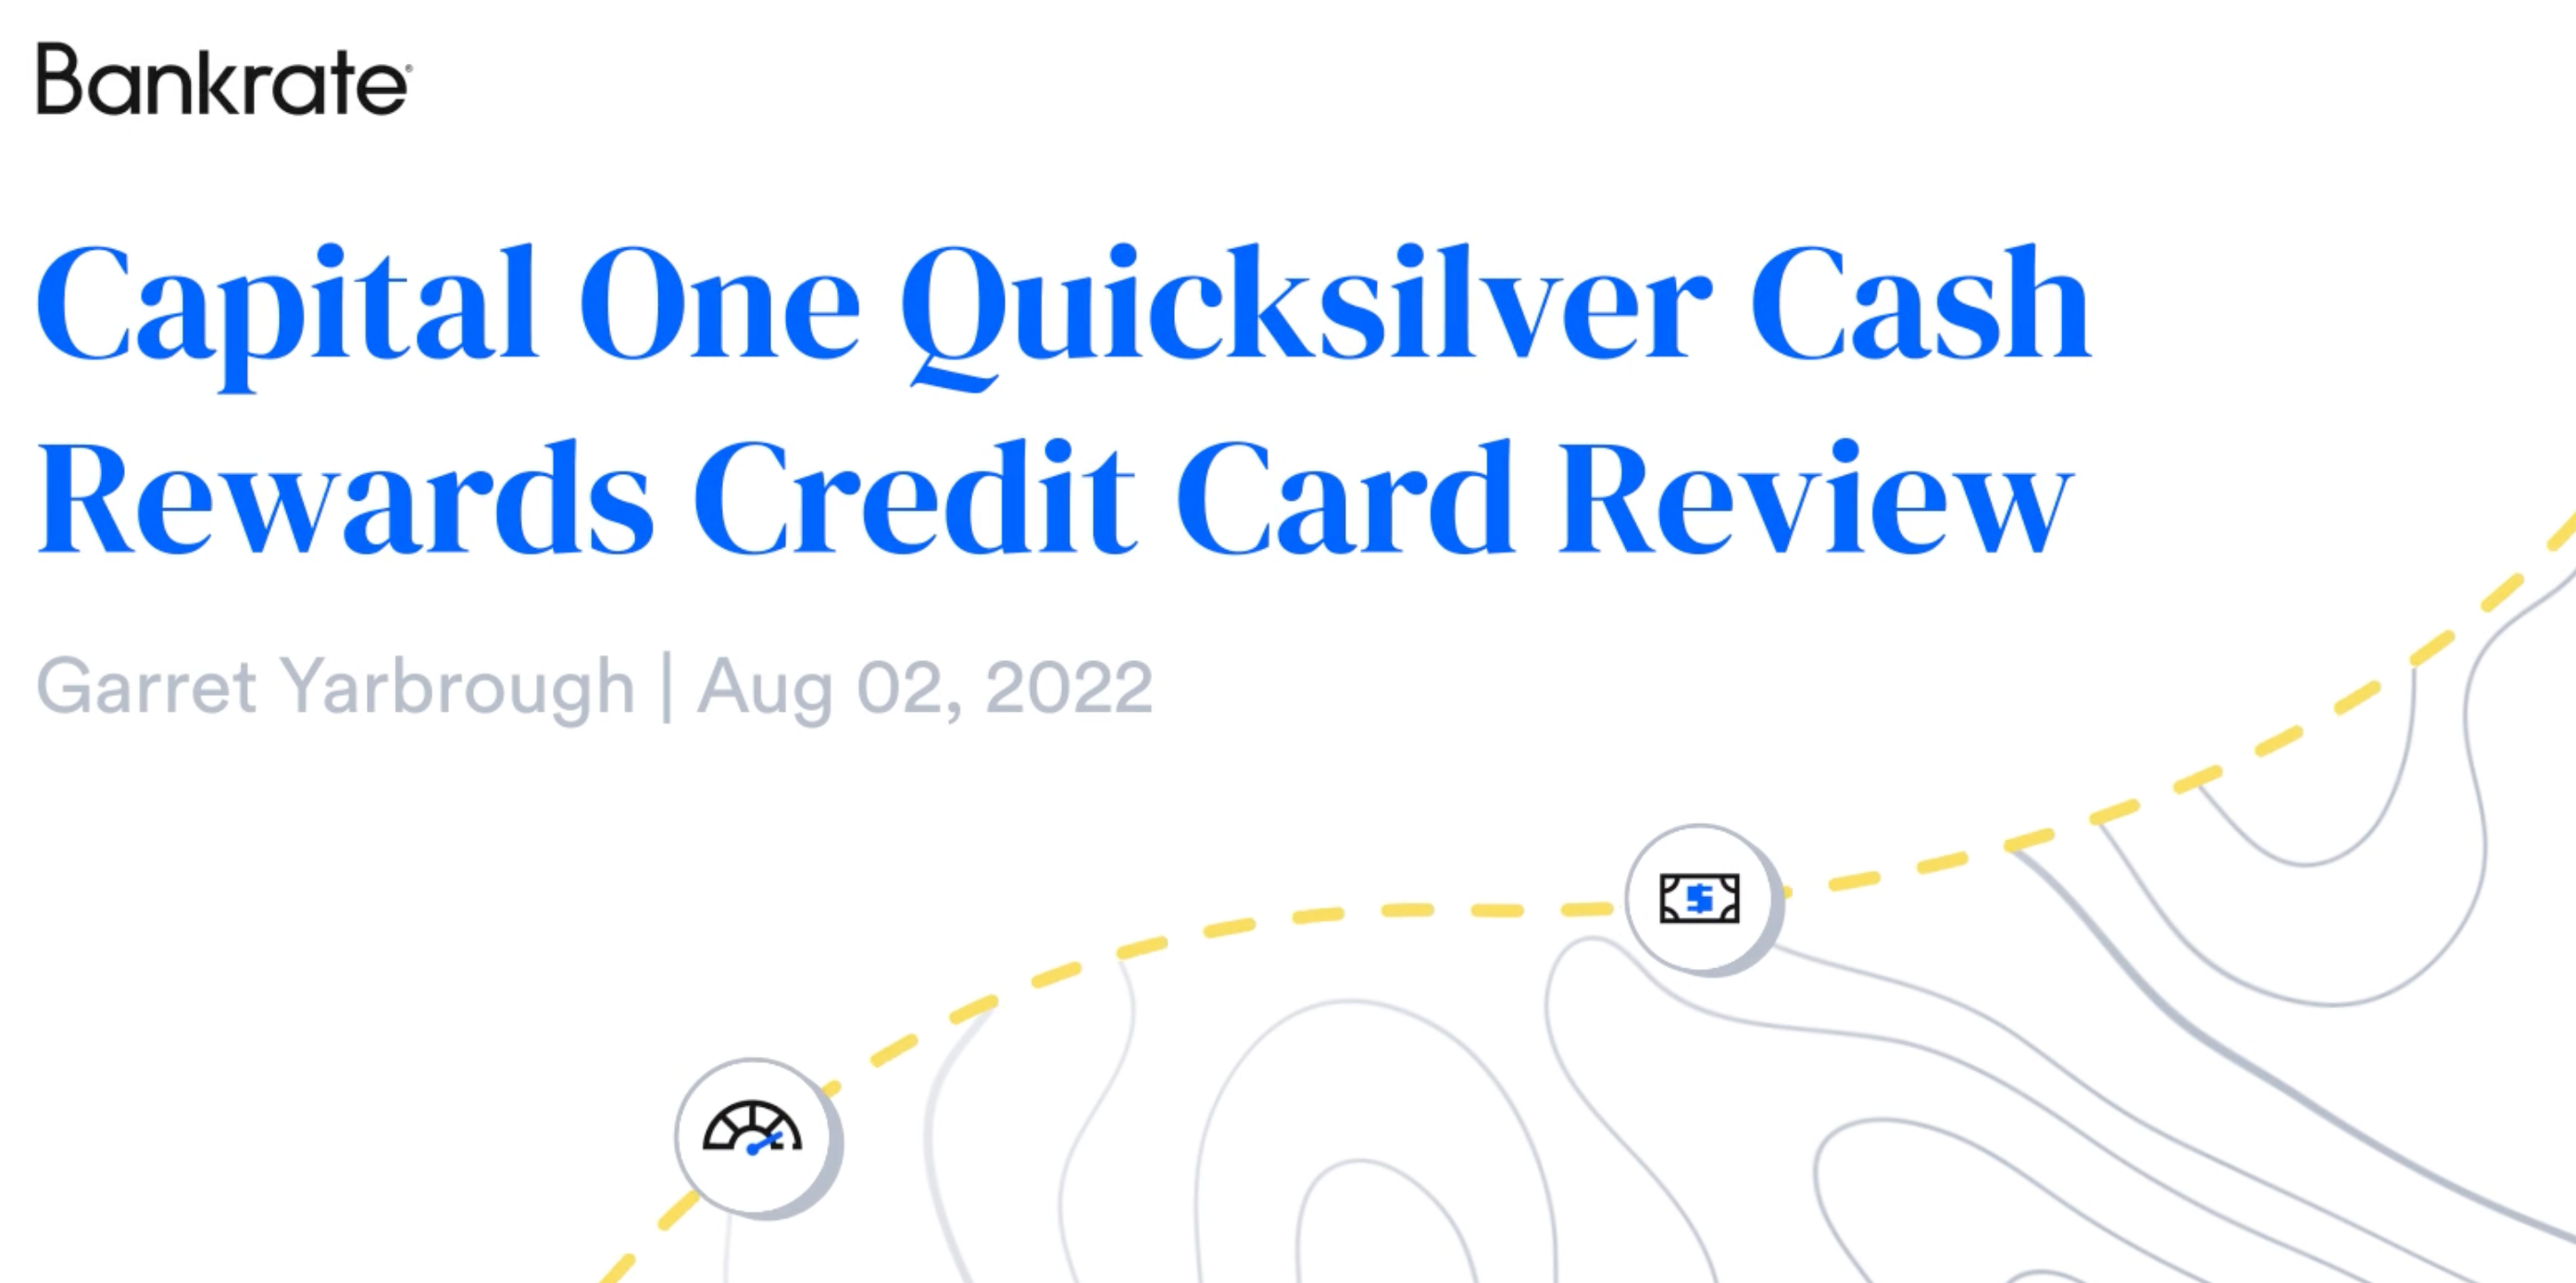 Capital One Quicksilver Cash Rewards Credit Card Review Bankrate